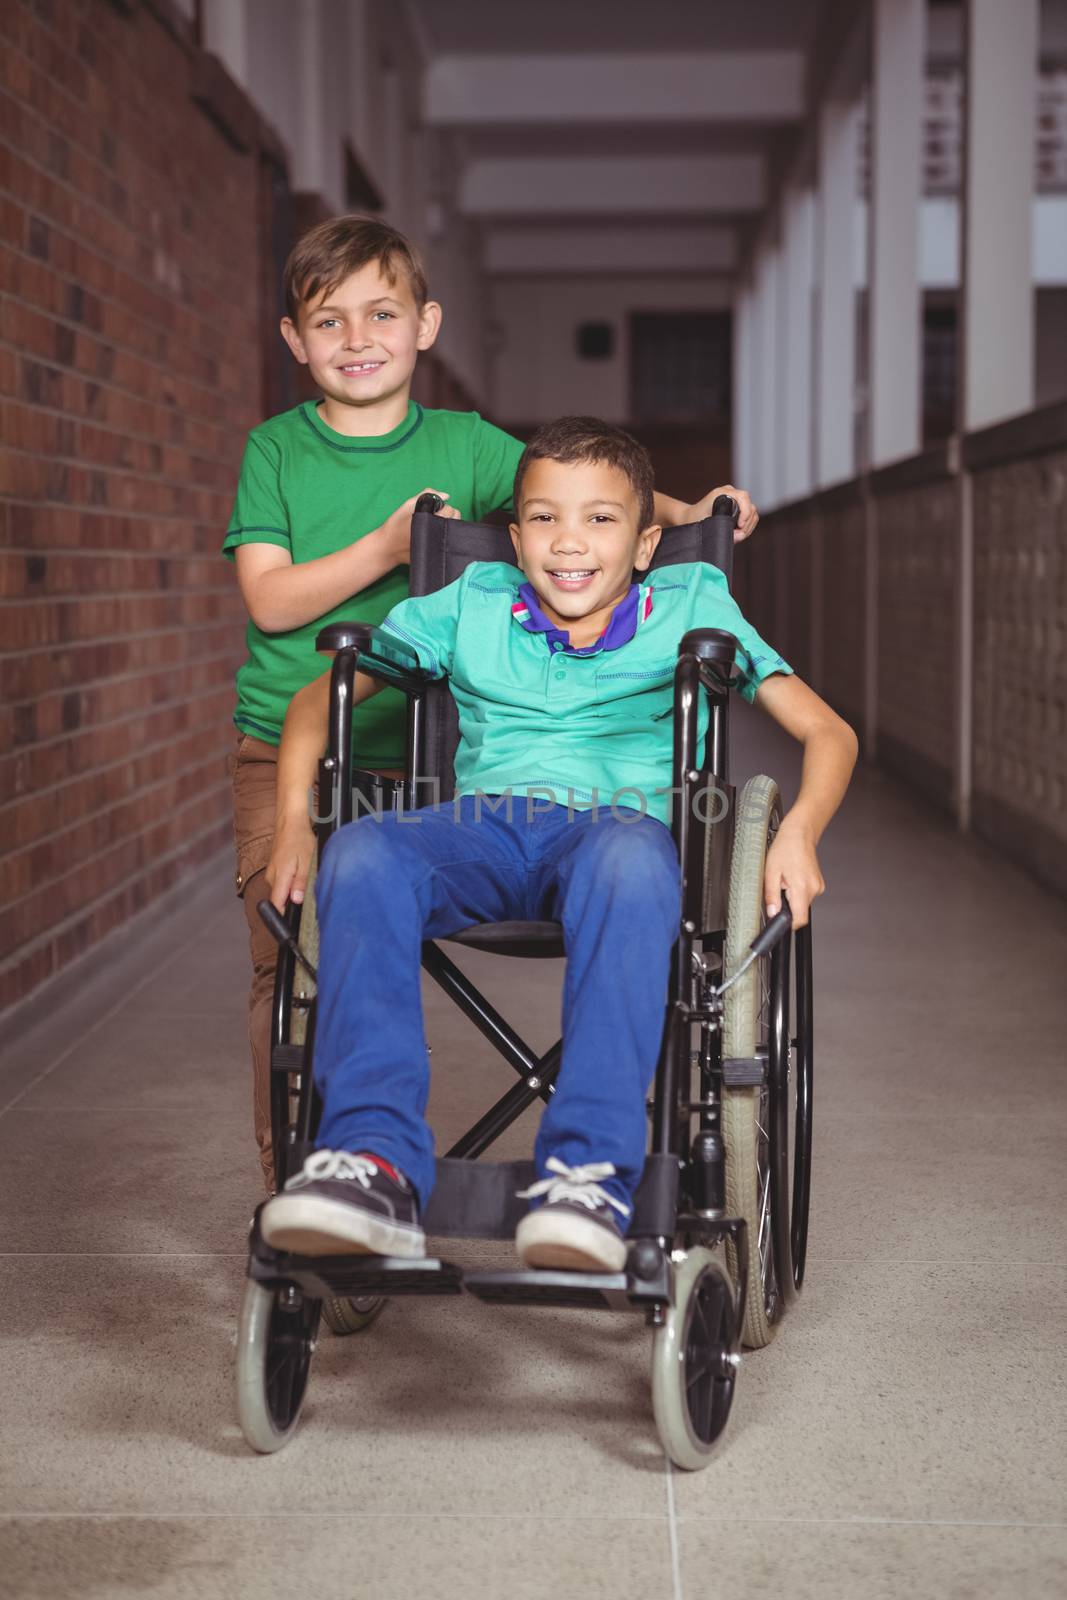 Smiling student in a wheelchair and friend beside him by Wavebreakmedia